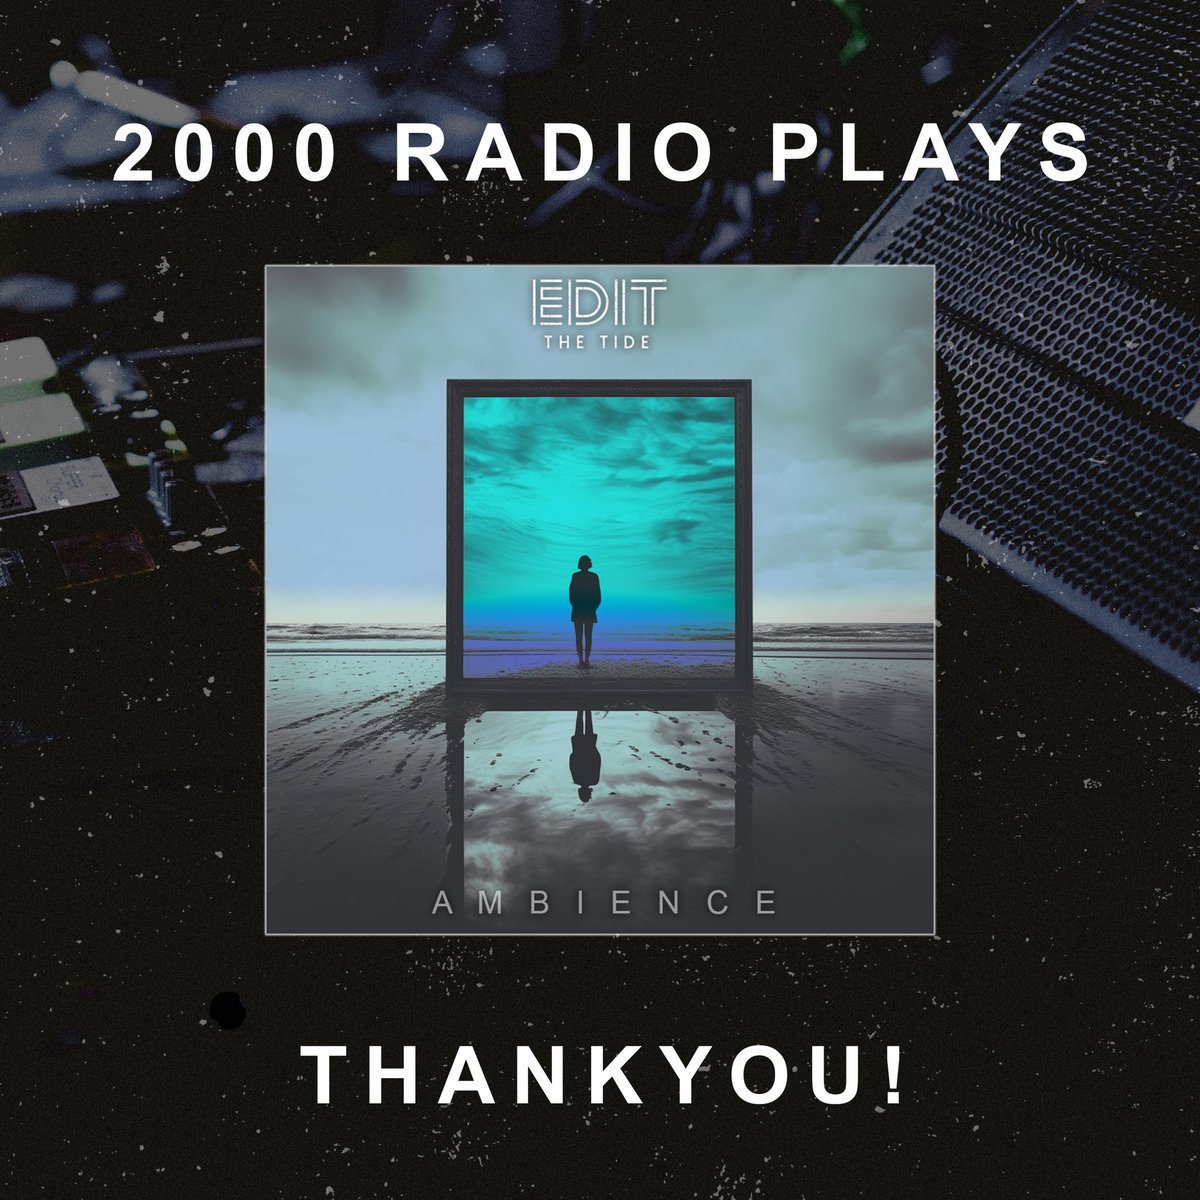 We’ve just found out that ‘Ambience’ has surpassed 2000 Radio plays! 🤯 We want to thank every Radio DJ, Presenter and especially Emma at @PlugginBaby for all of her hard work! 🫶🏻 A huge thankyou to everyone who has taken the time to listen to it! We love you all 💙 ETT 🌊